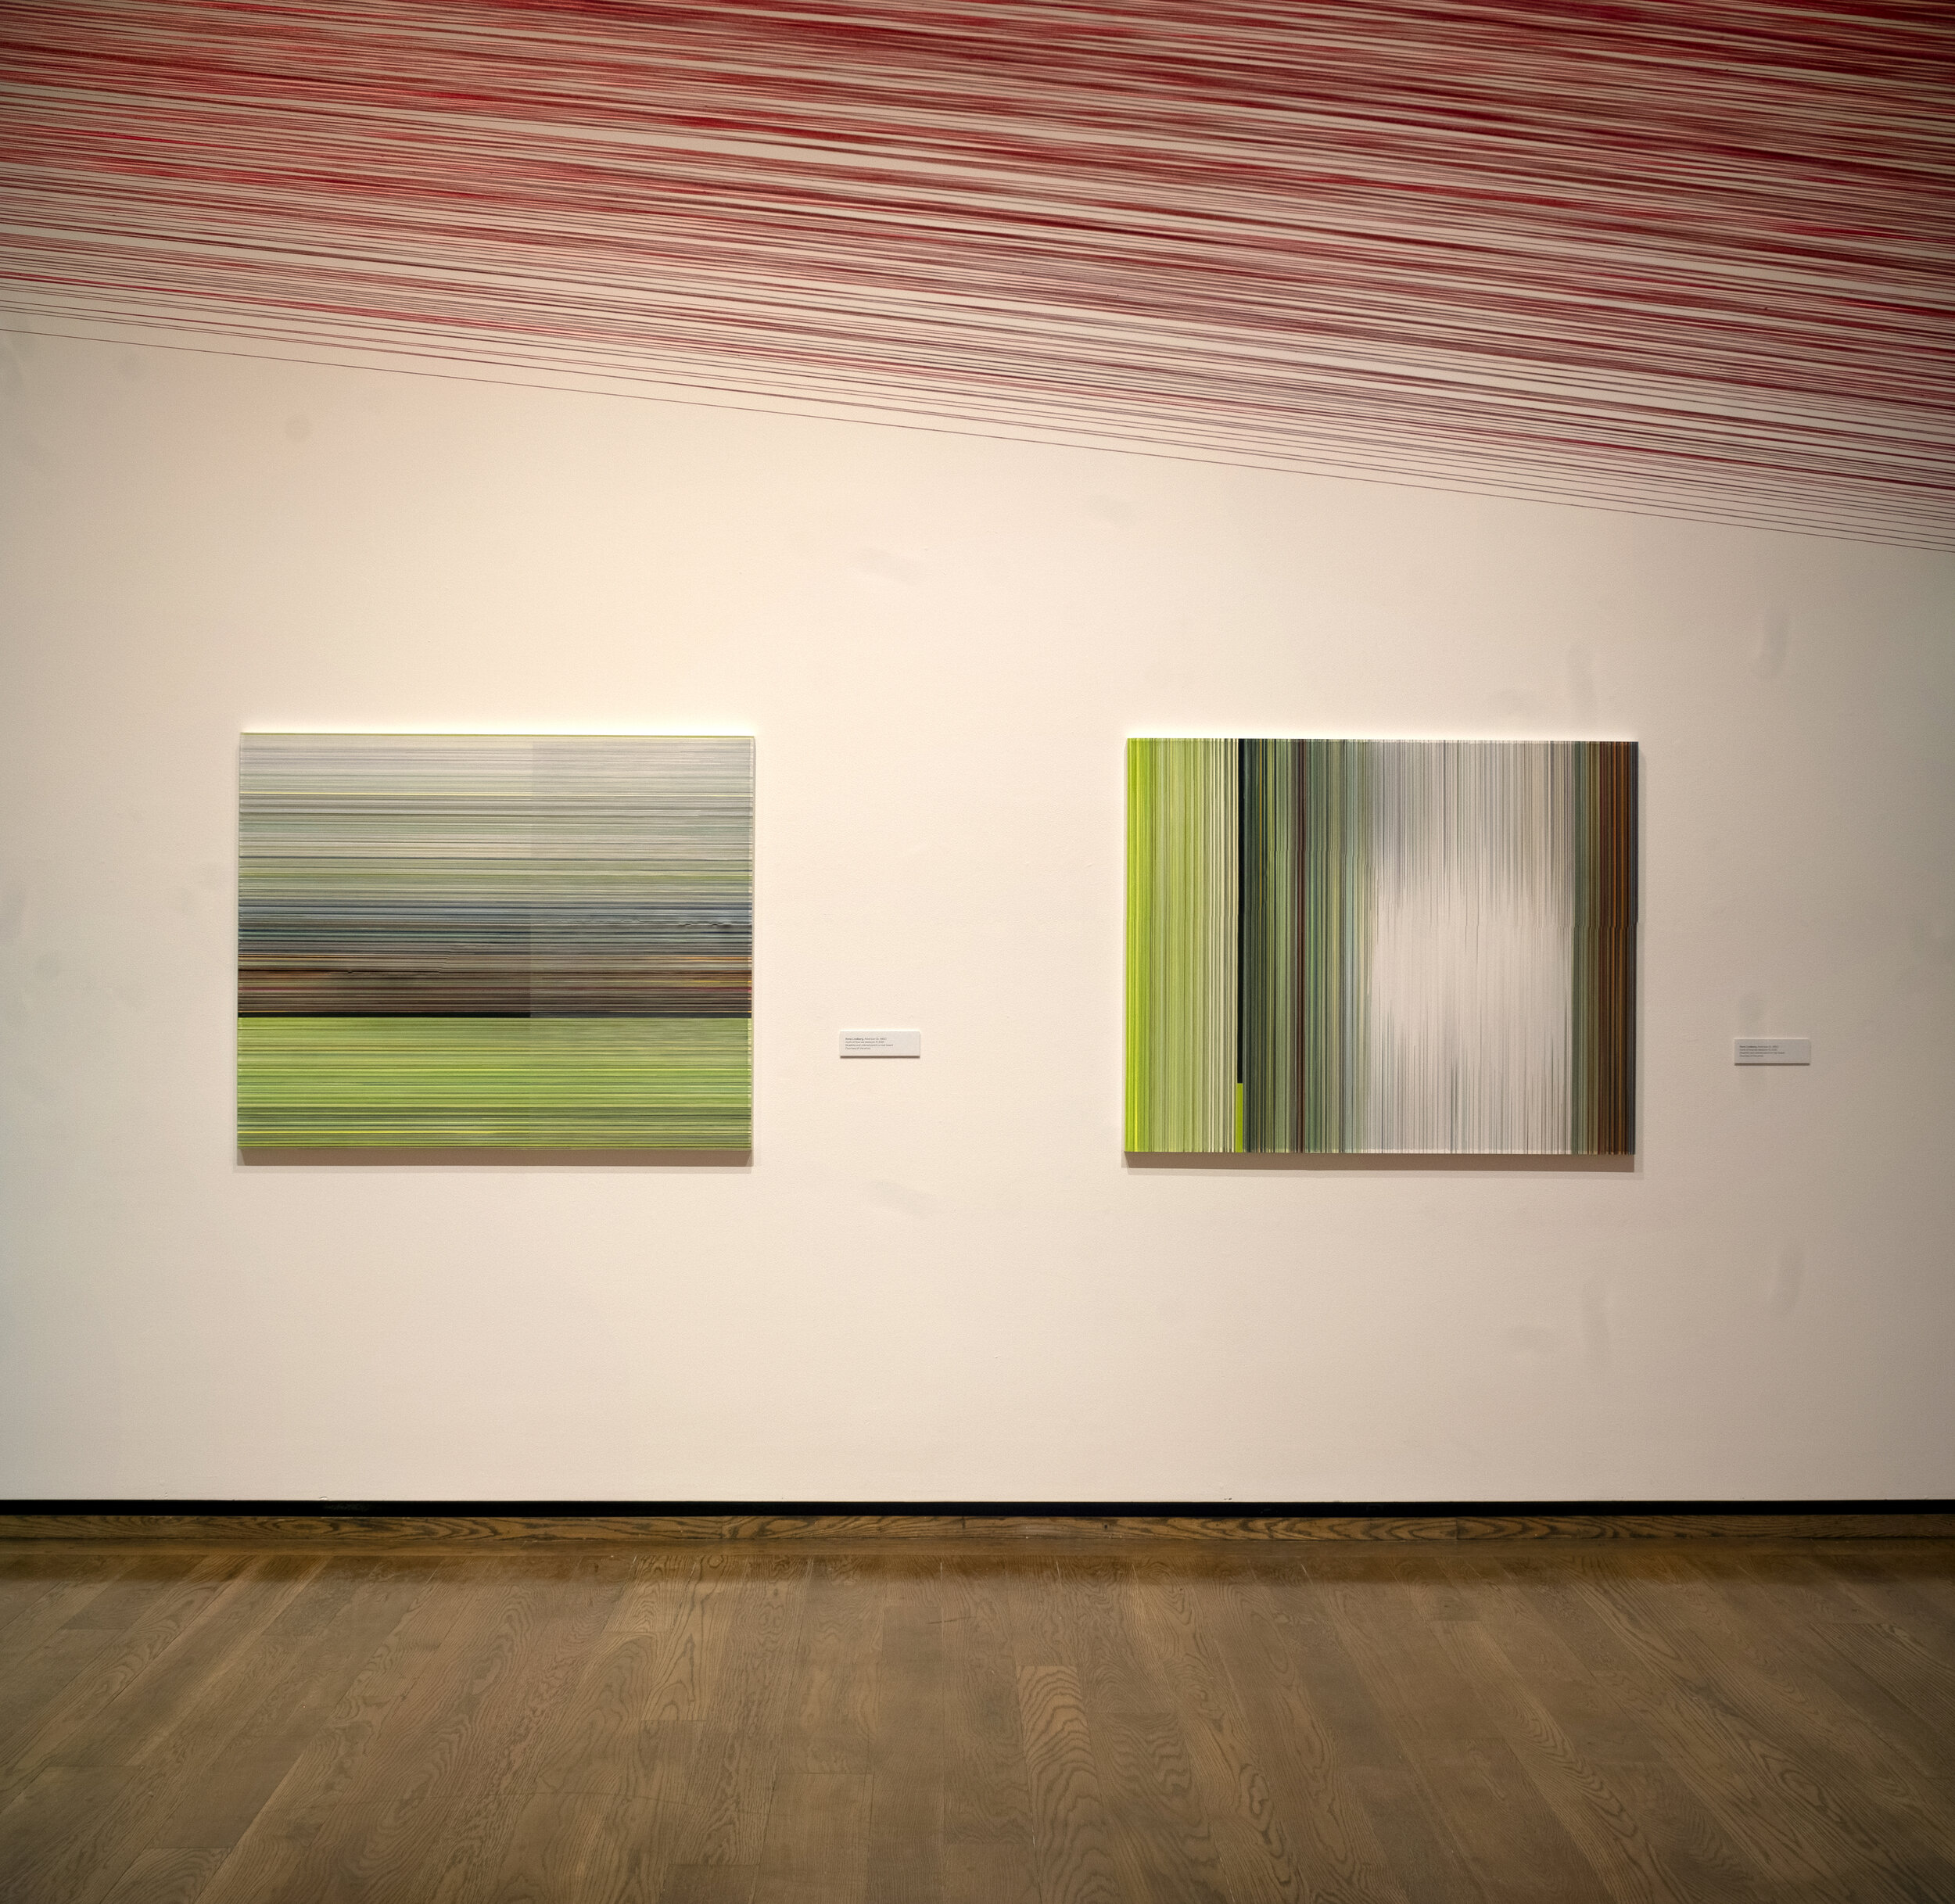  installation view with drawings   roots of how we measure 10   2022 graphite and colored pencil on mat board Collection of Everson Museum of Art, Syracuse, New York    roots of how we measure 11   2022 graphite and colored pencil on mat board Collec